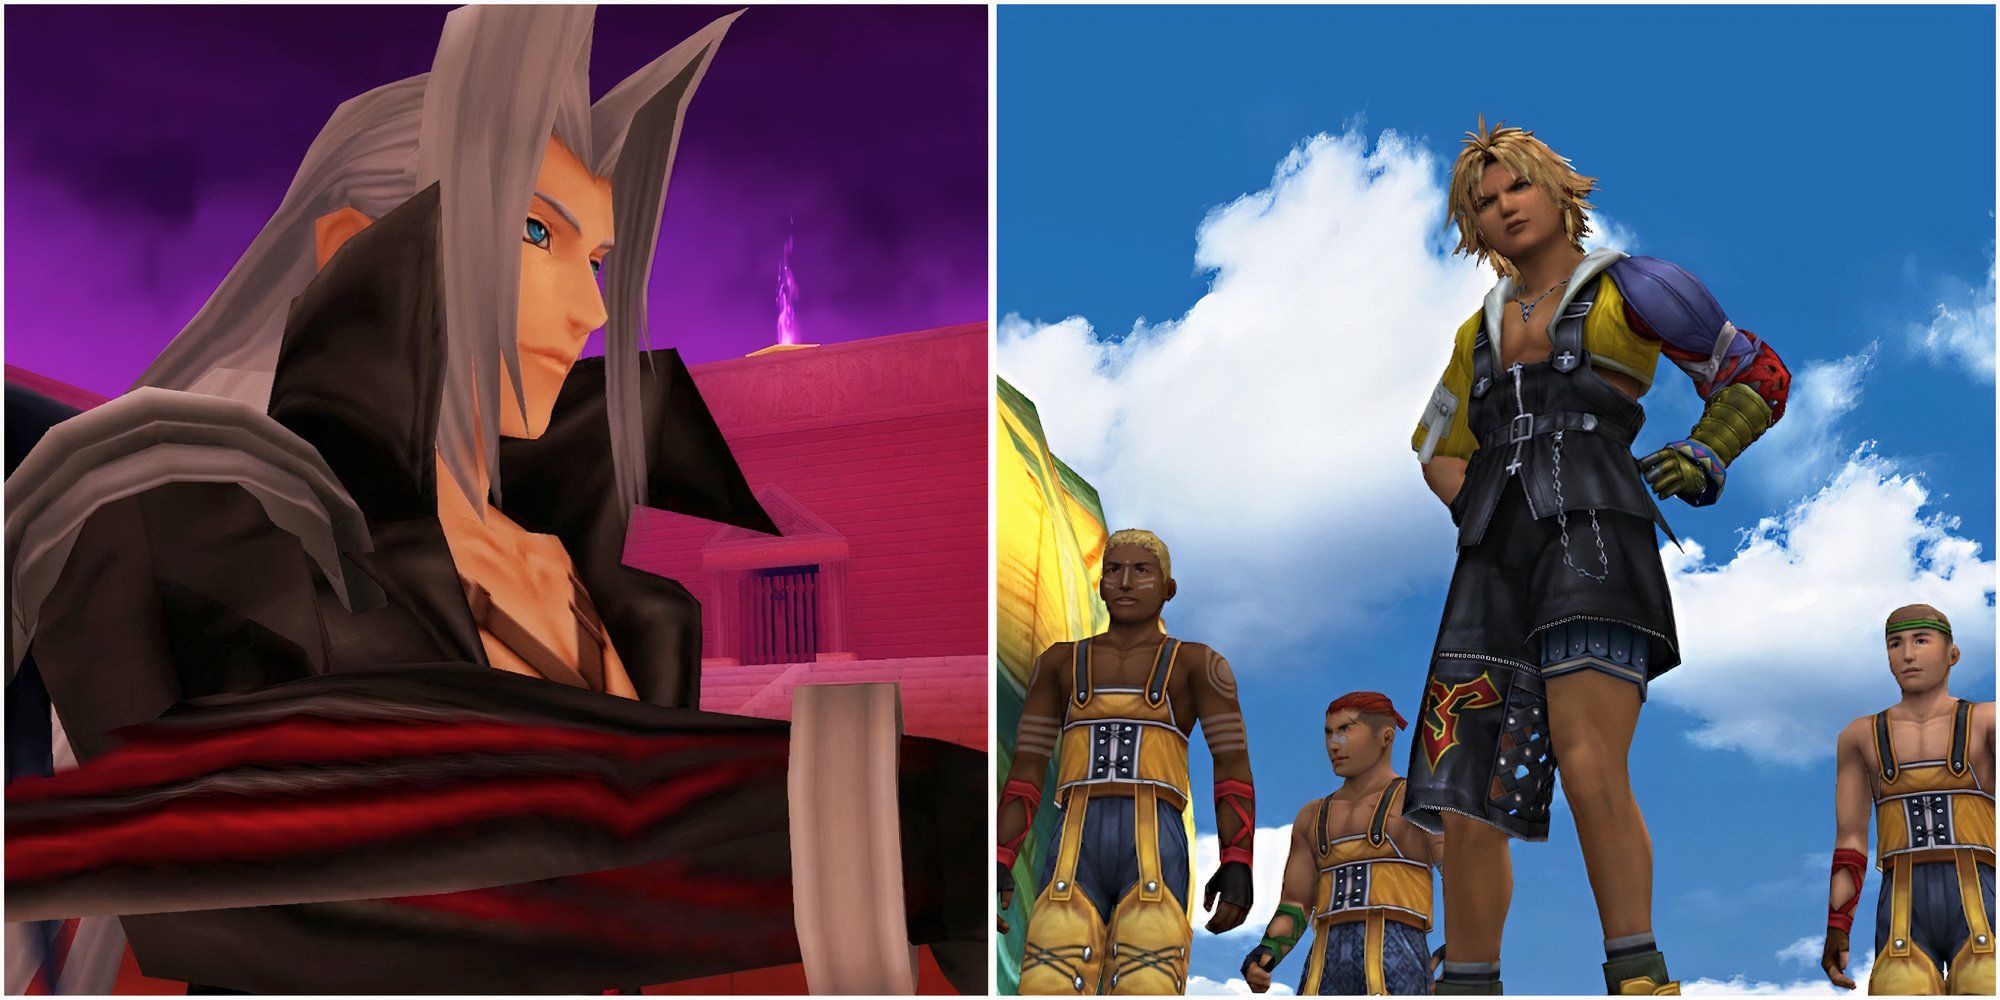 Sephiroth in Kingdom Hearts and the Besaid Aurochs in Final Fantasy 10